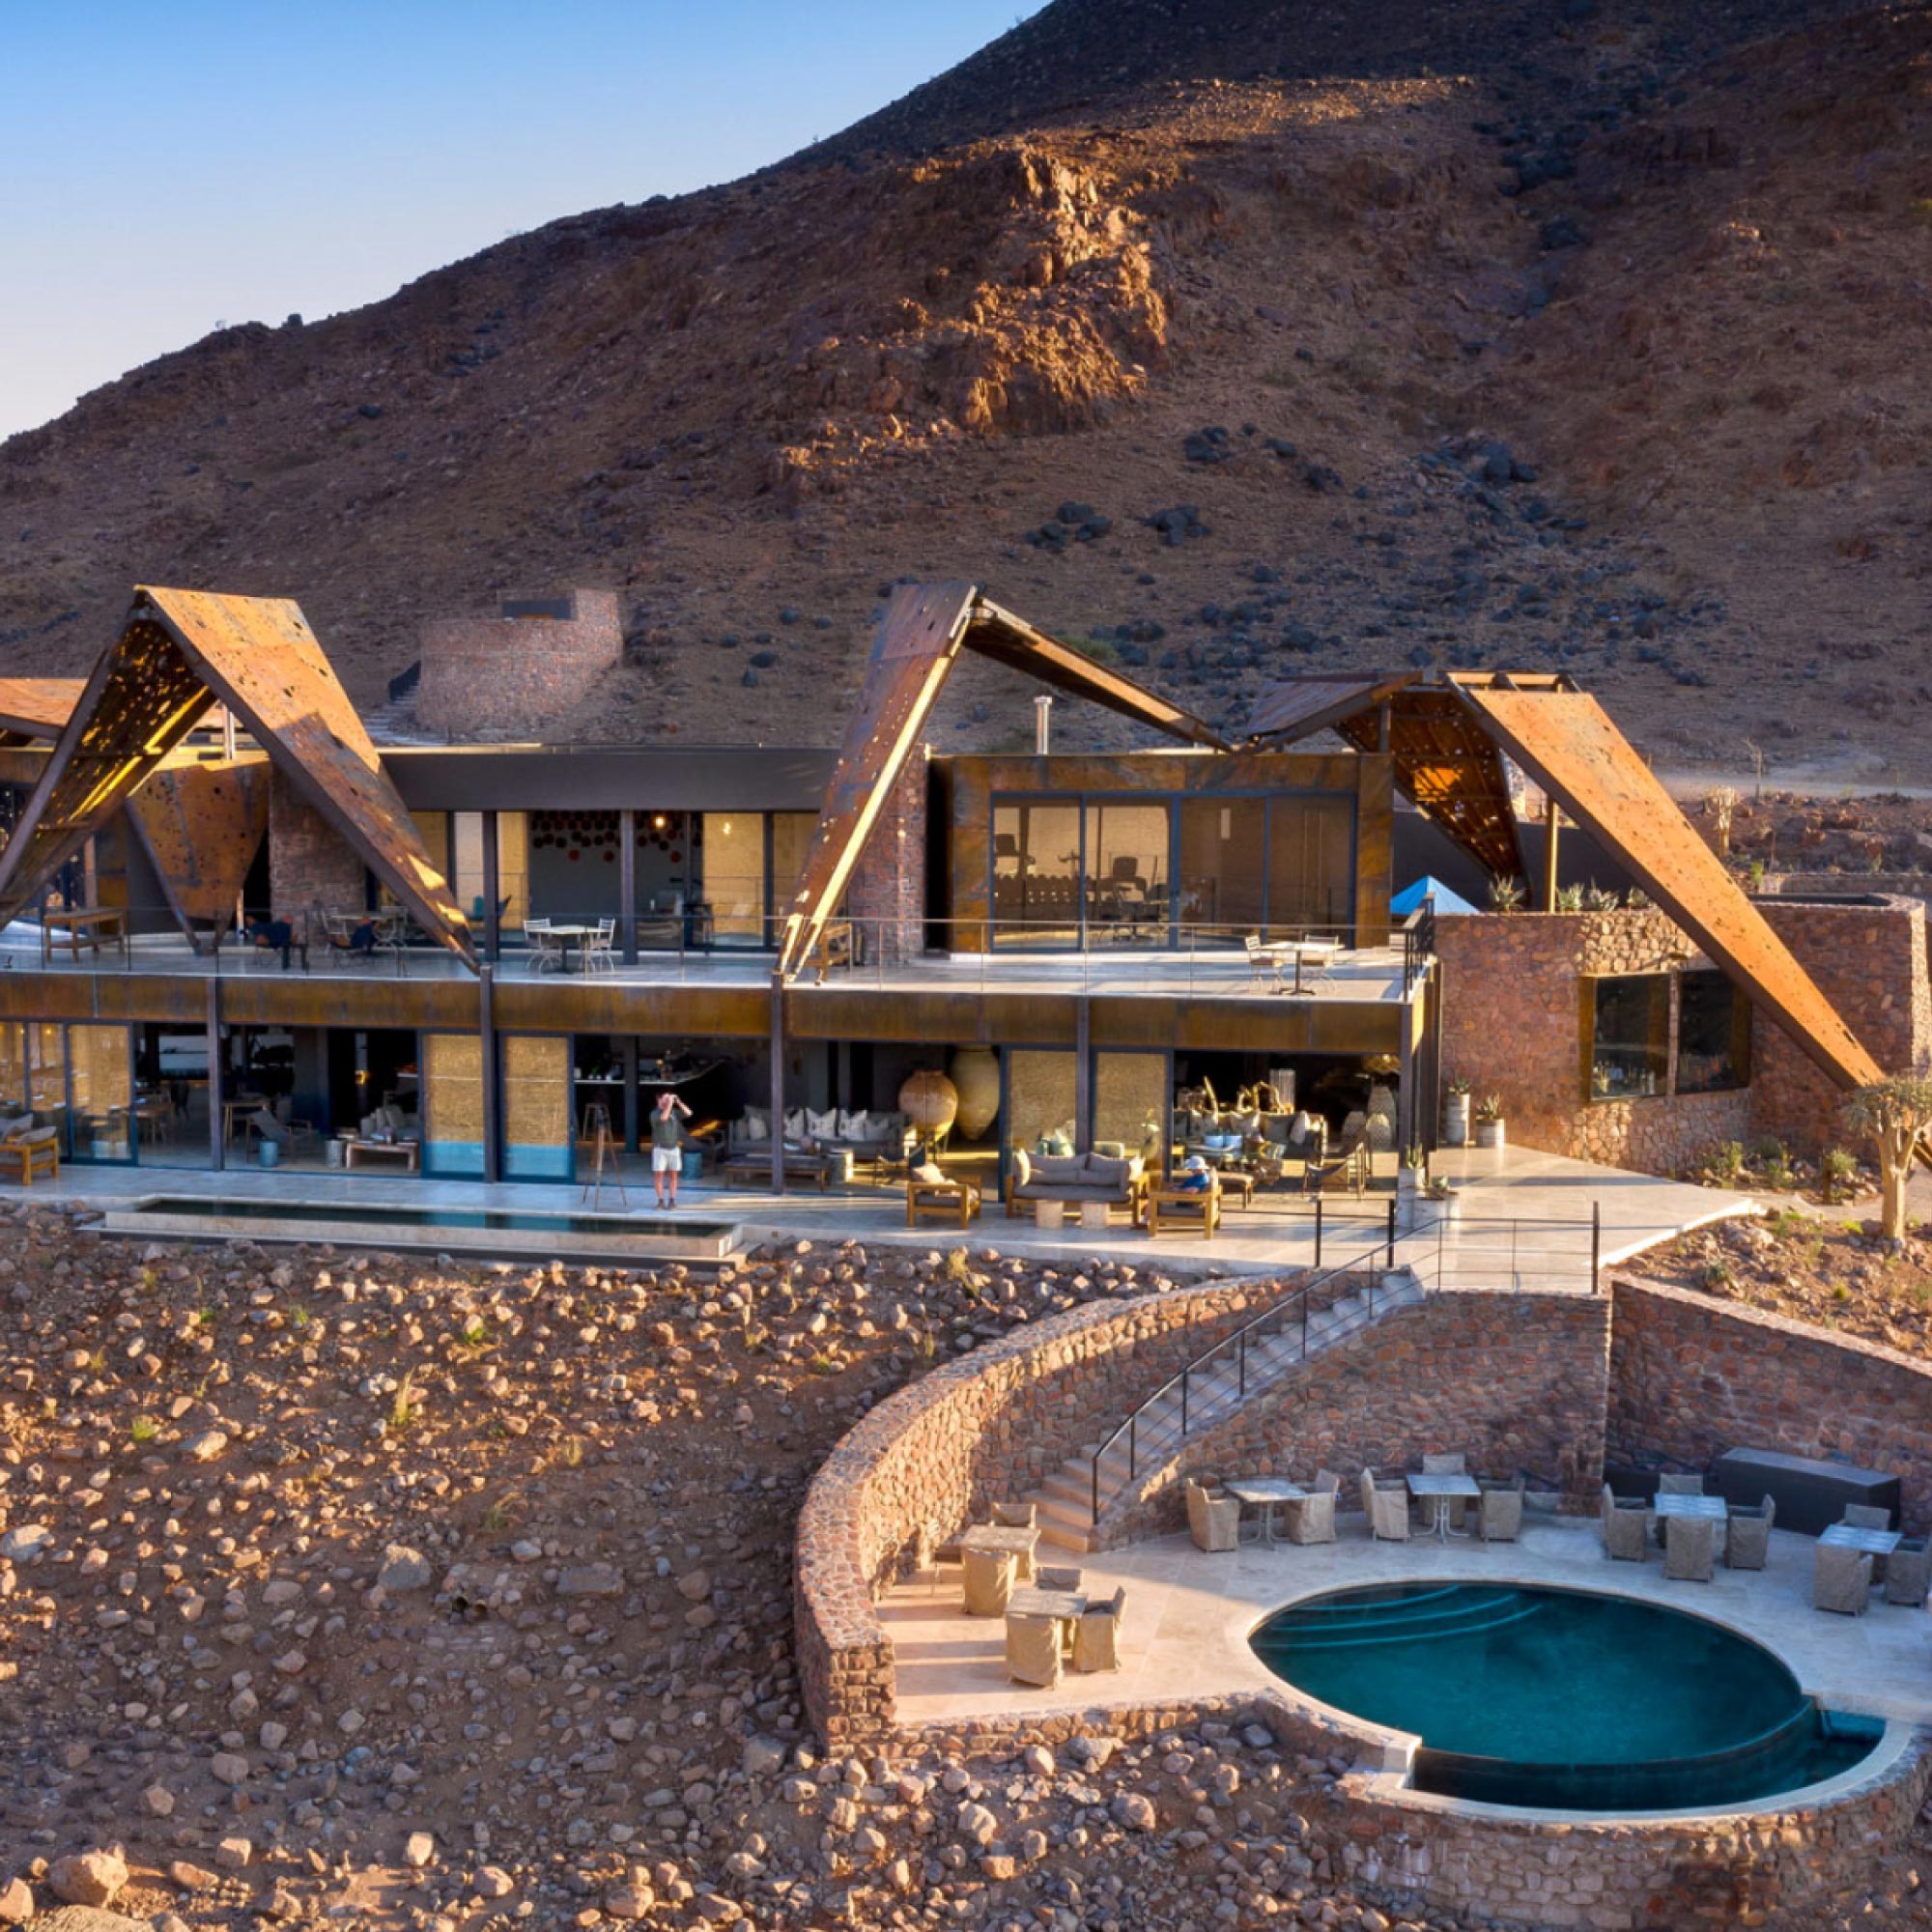 Experience the luxury of Sossusvlei Desert Lodge, nestled in Namibia's Namib Desert. The lodge offers stunning views of the desert landscape and stylish accommodations for a sophisticated desert retreat.